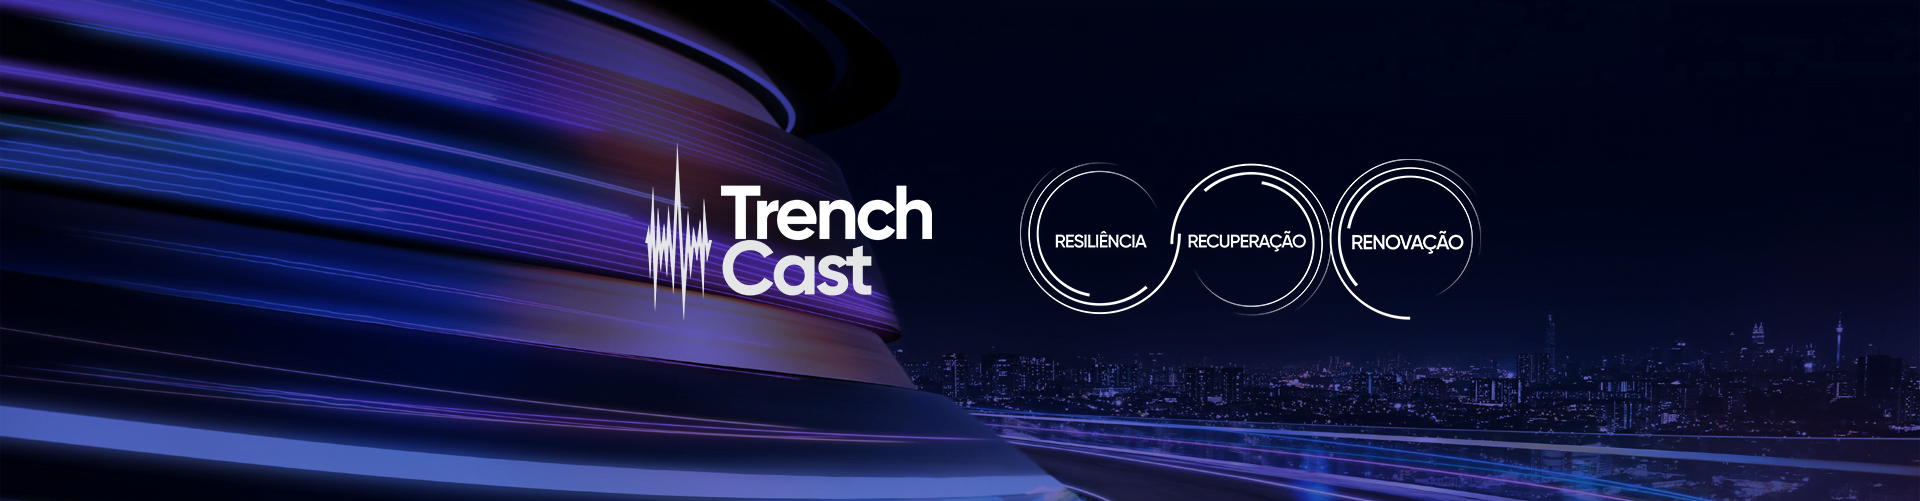 TrenchCast 3R